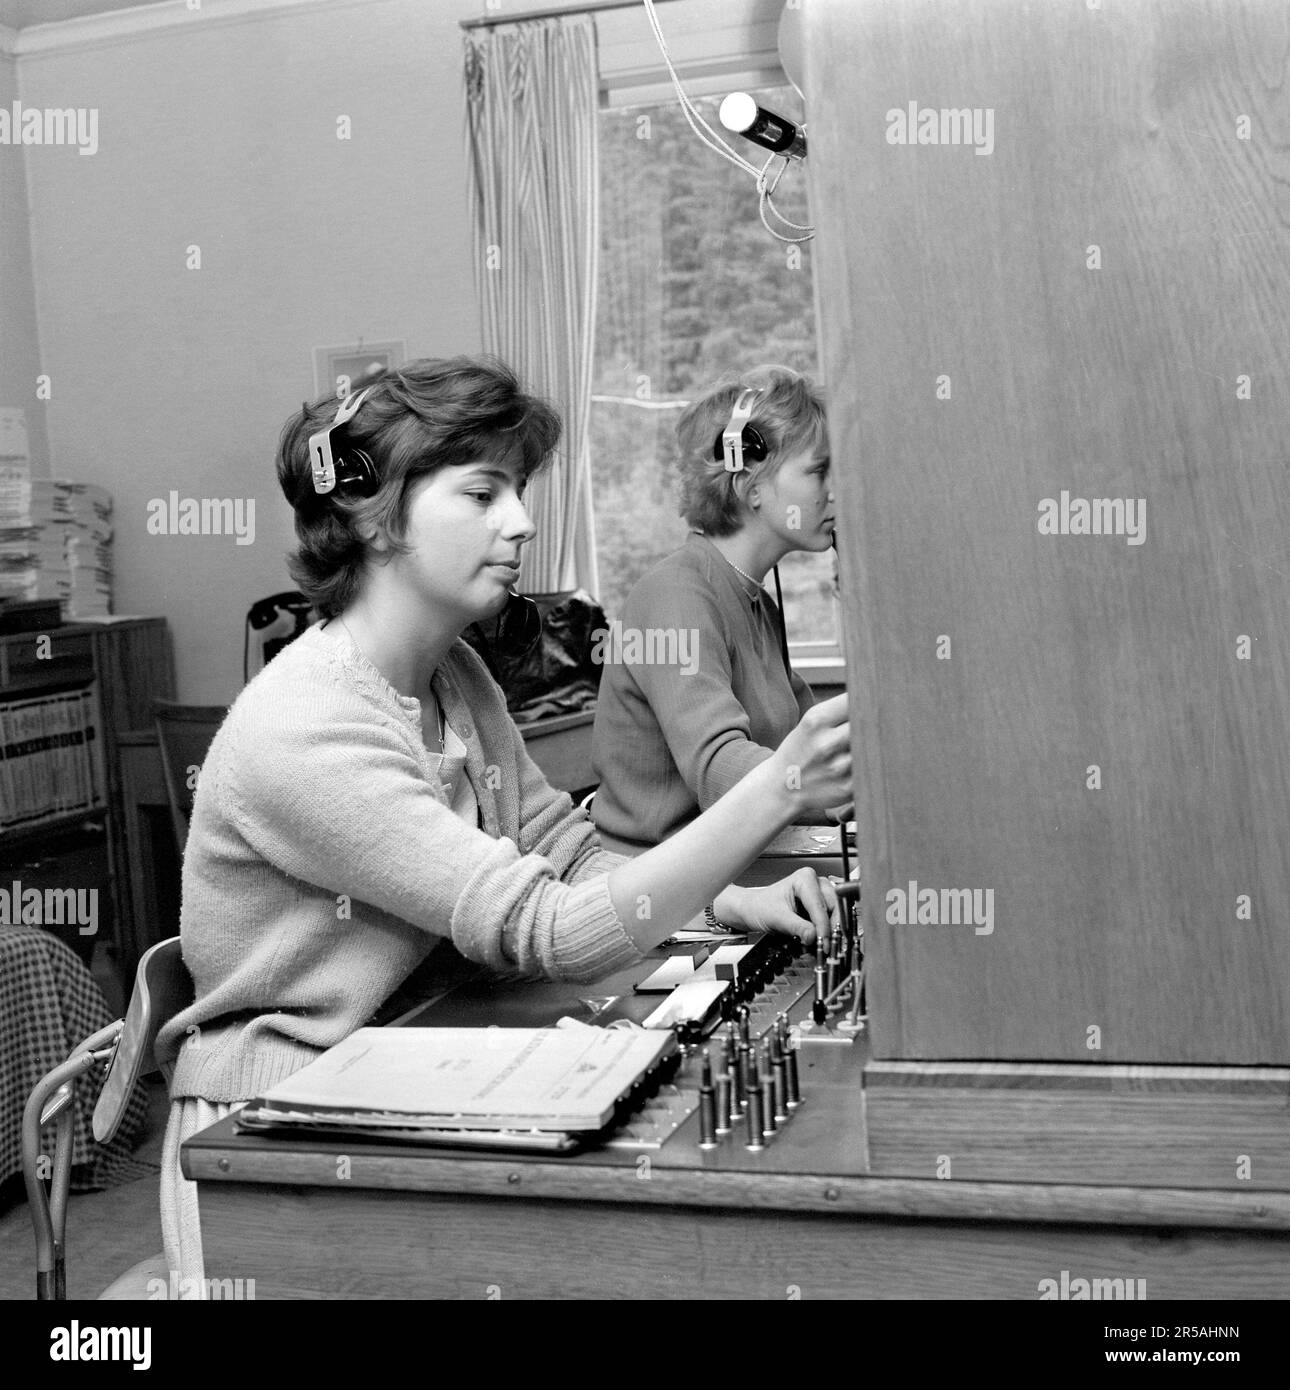 Telephony in the 1960s. Woman working at a telephone switchboard as it's operator. A telephone communication system that was manually operated where the incoming calls were forwarded and redirected to the another telephone number by the operator, in this case locally within the building serving a company or an organization with many internal telephone lines. The switchboard operator could take messages, put you on hold if the line was busy. Sweden 1963 Stock Photo